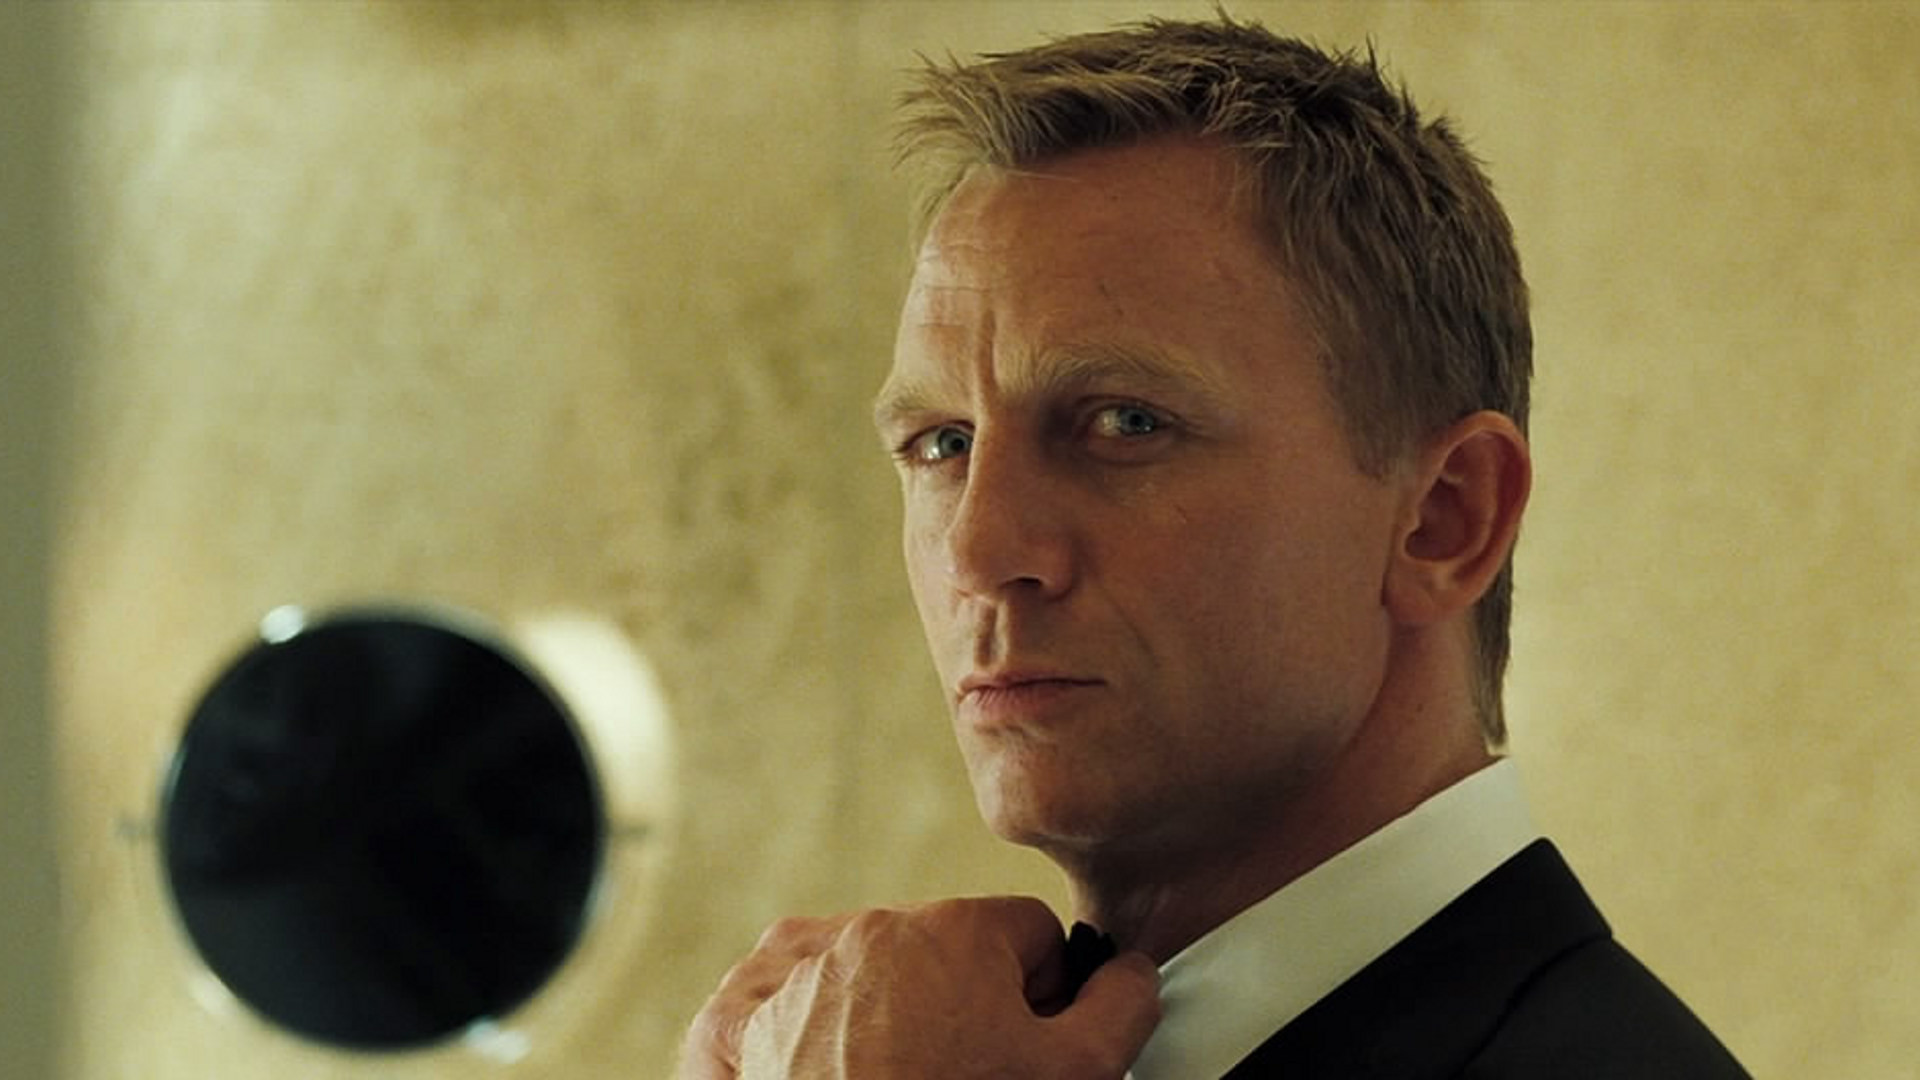 actor who played 007 in casino royale